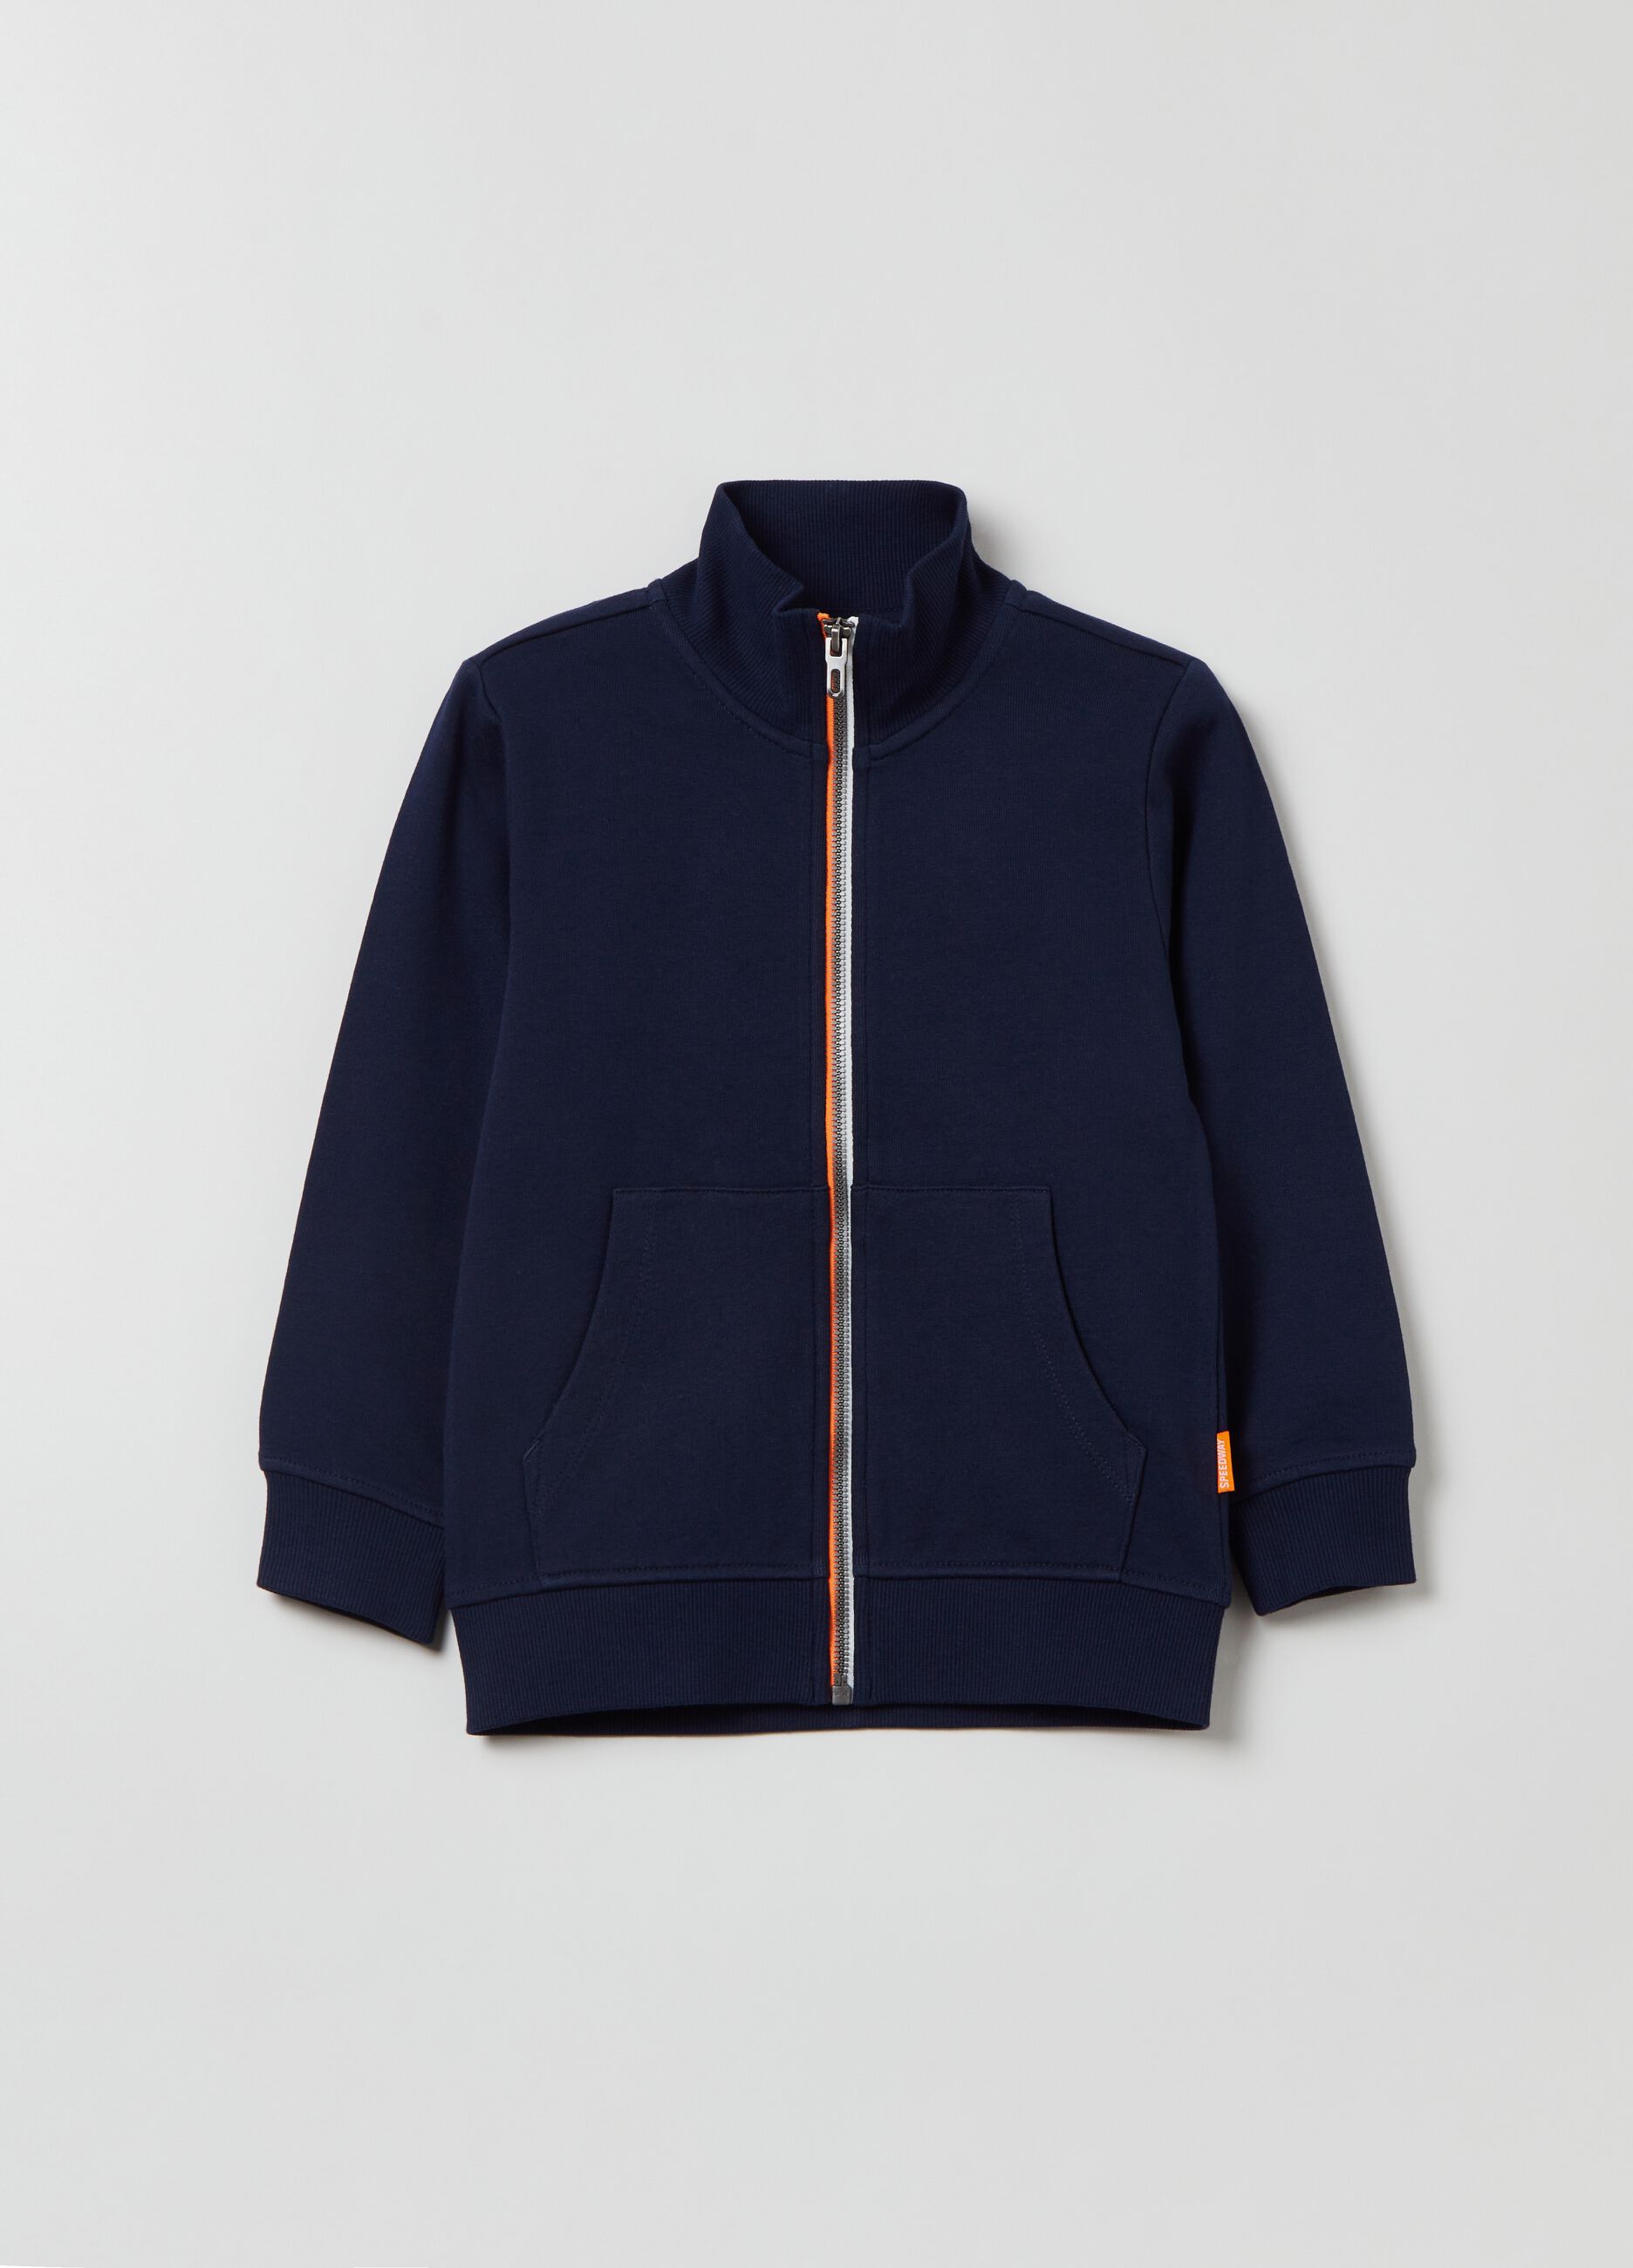 Plush full-zip with high neck